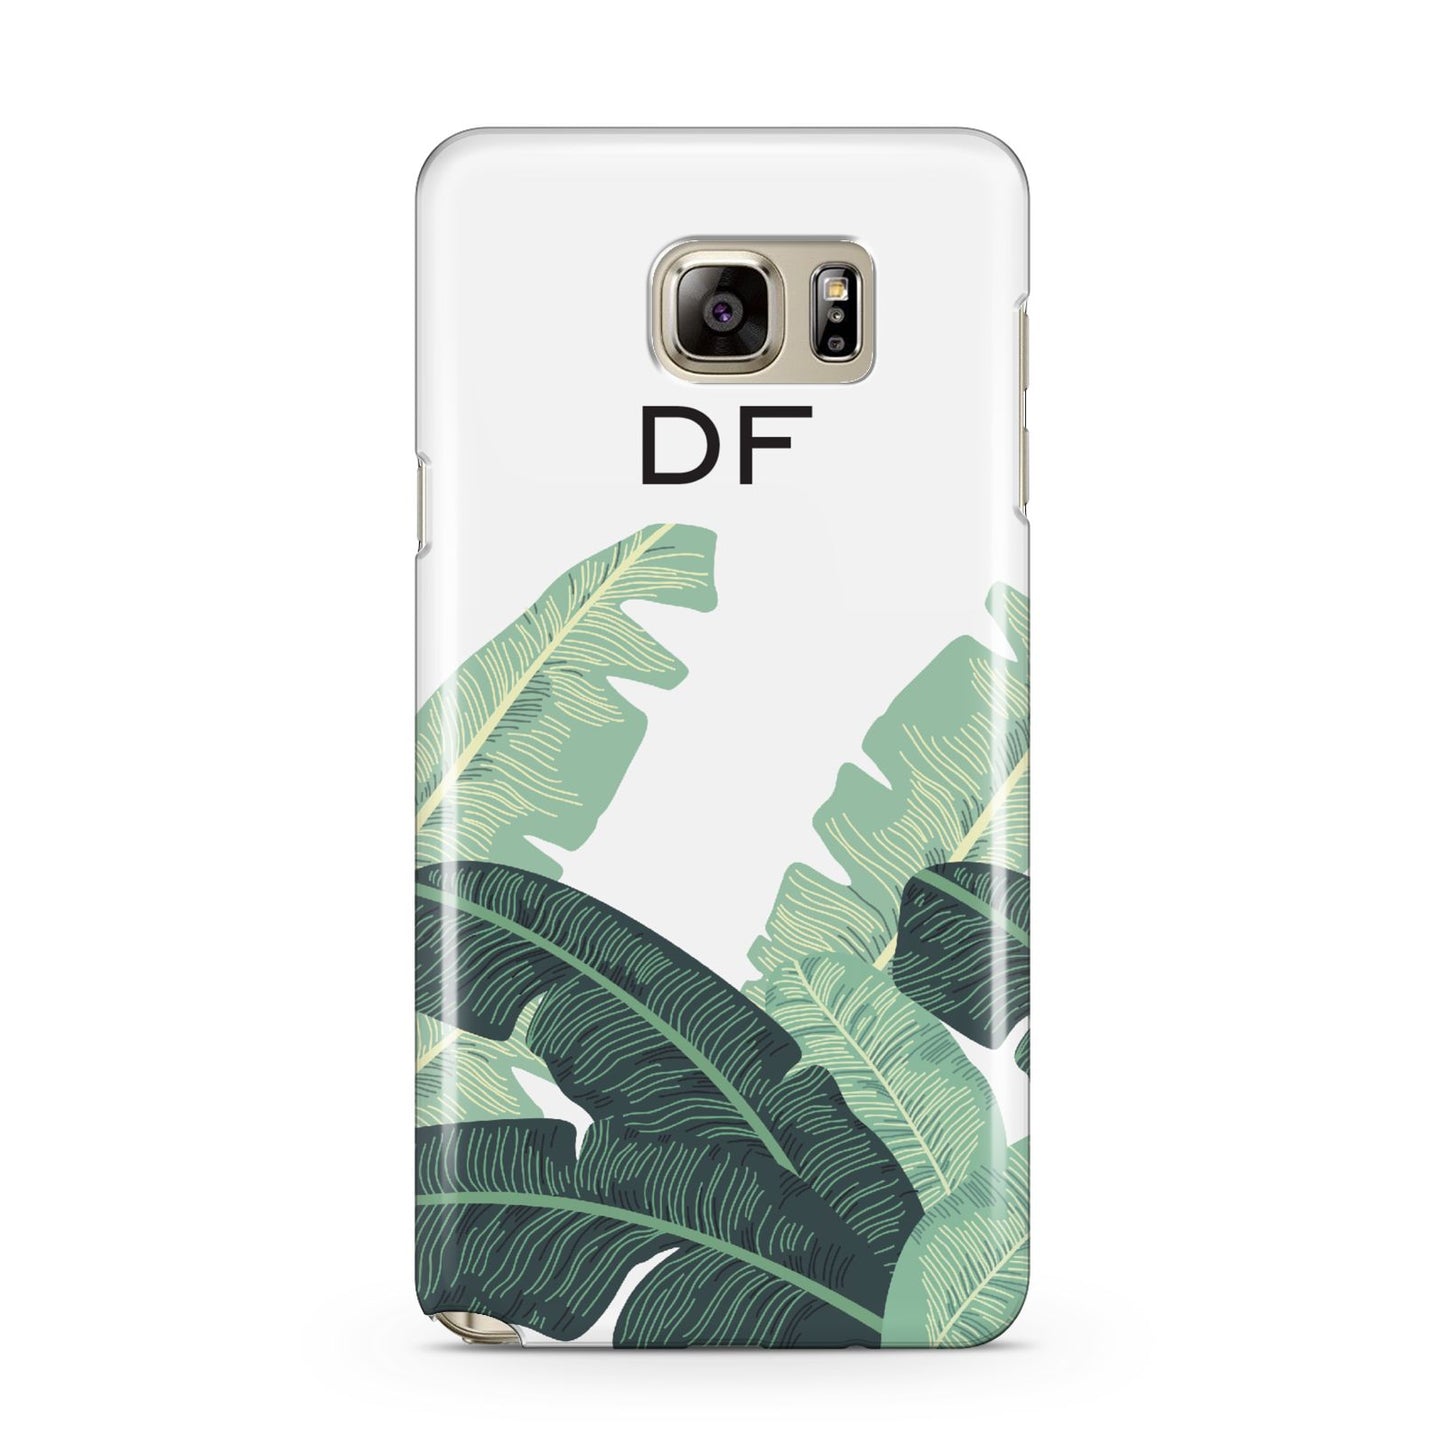 Personalised White Banana Leaf Samsung Galaxy Note 5 Case